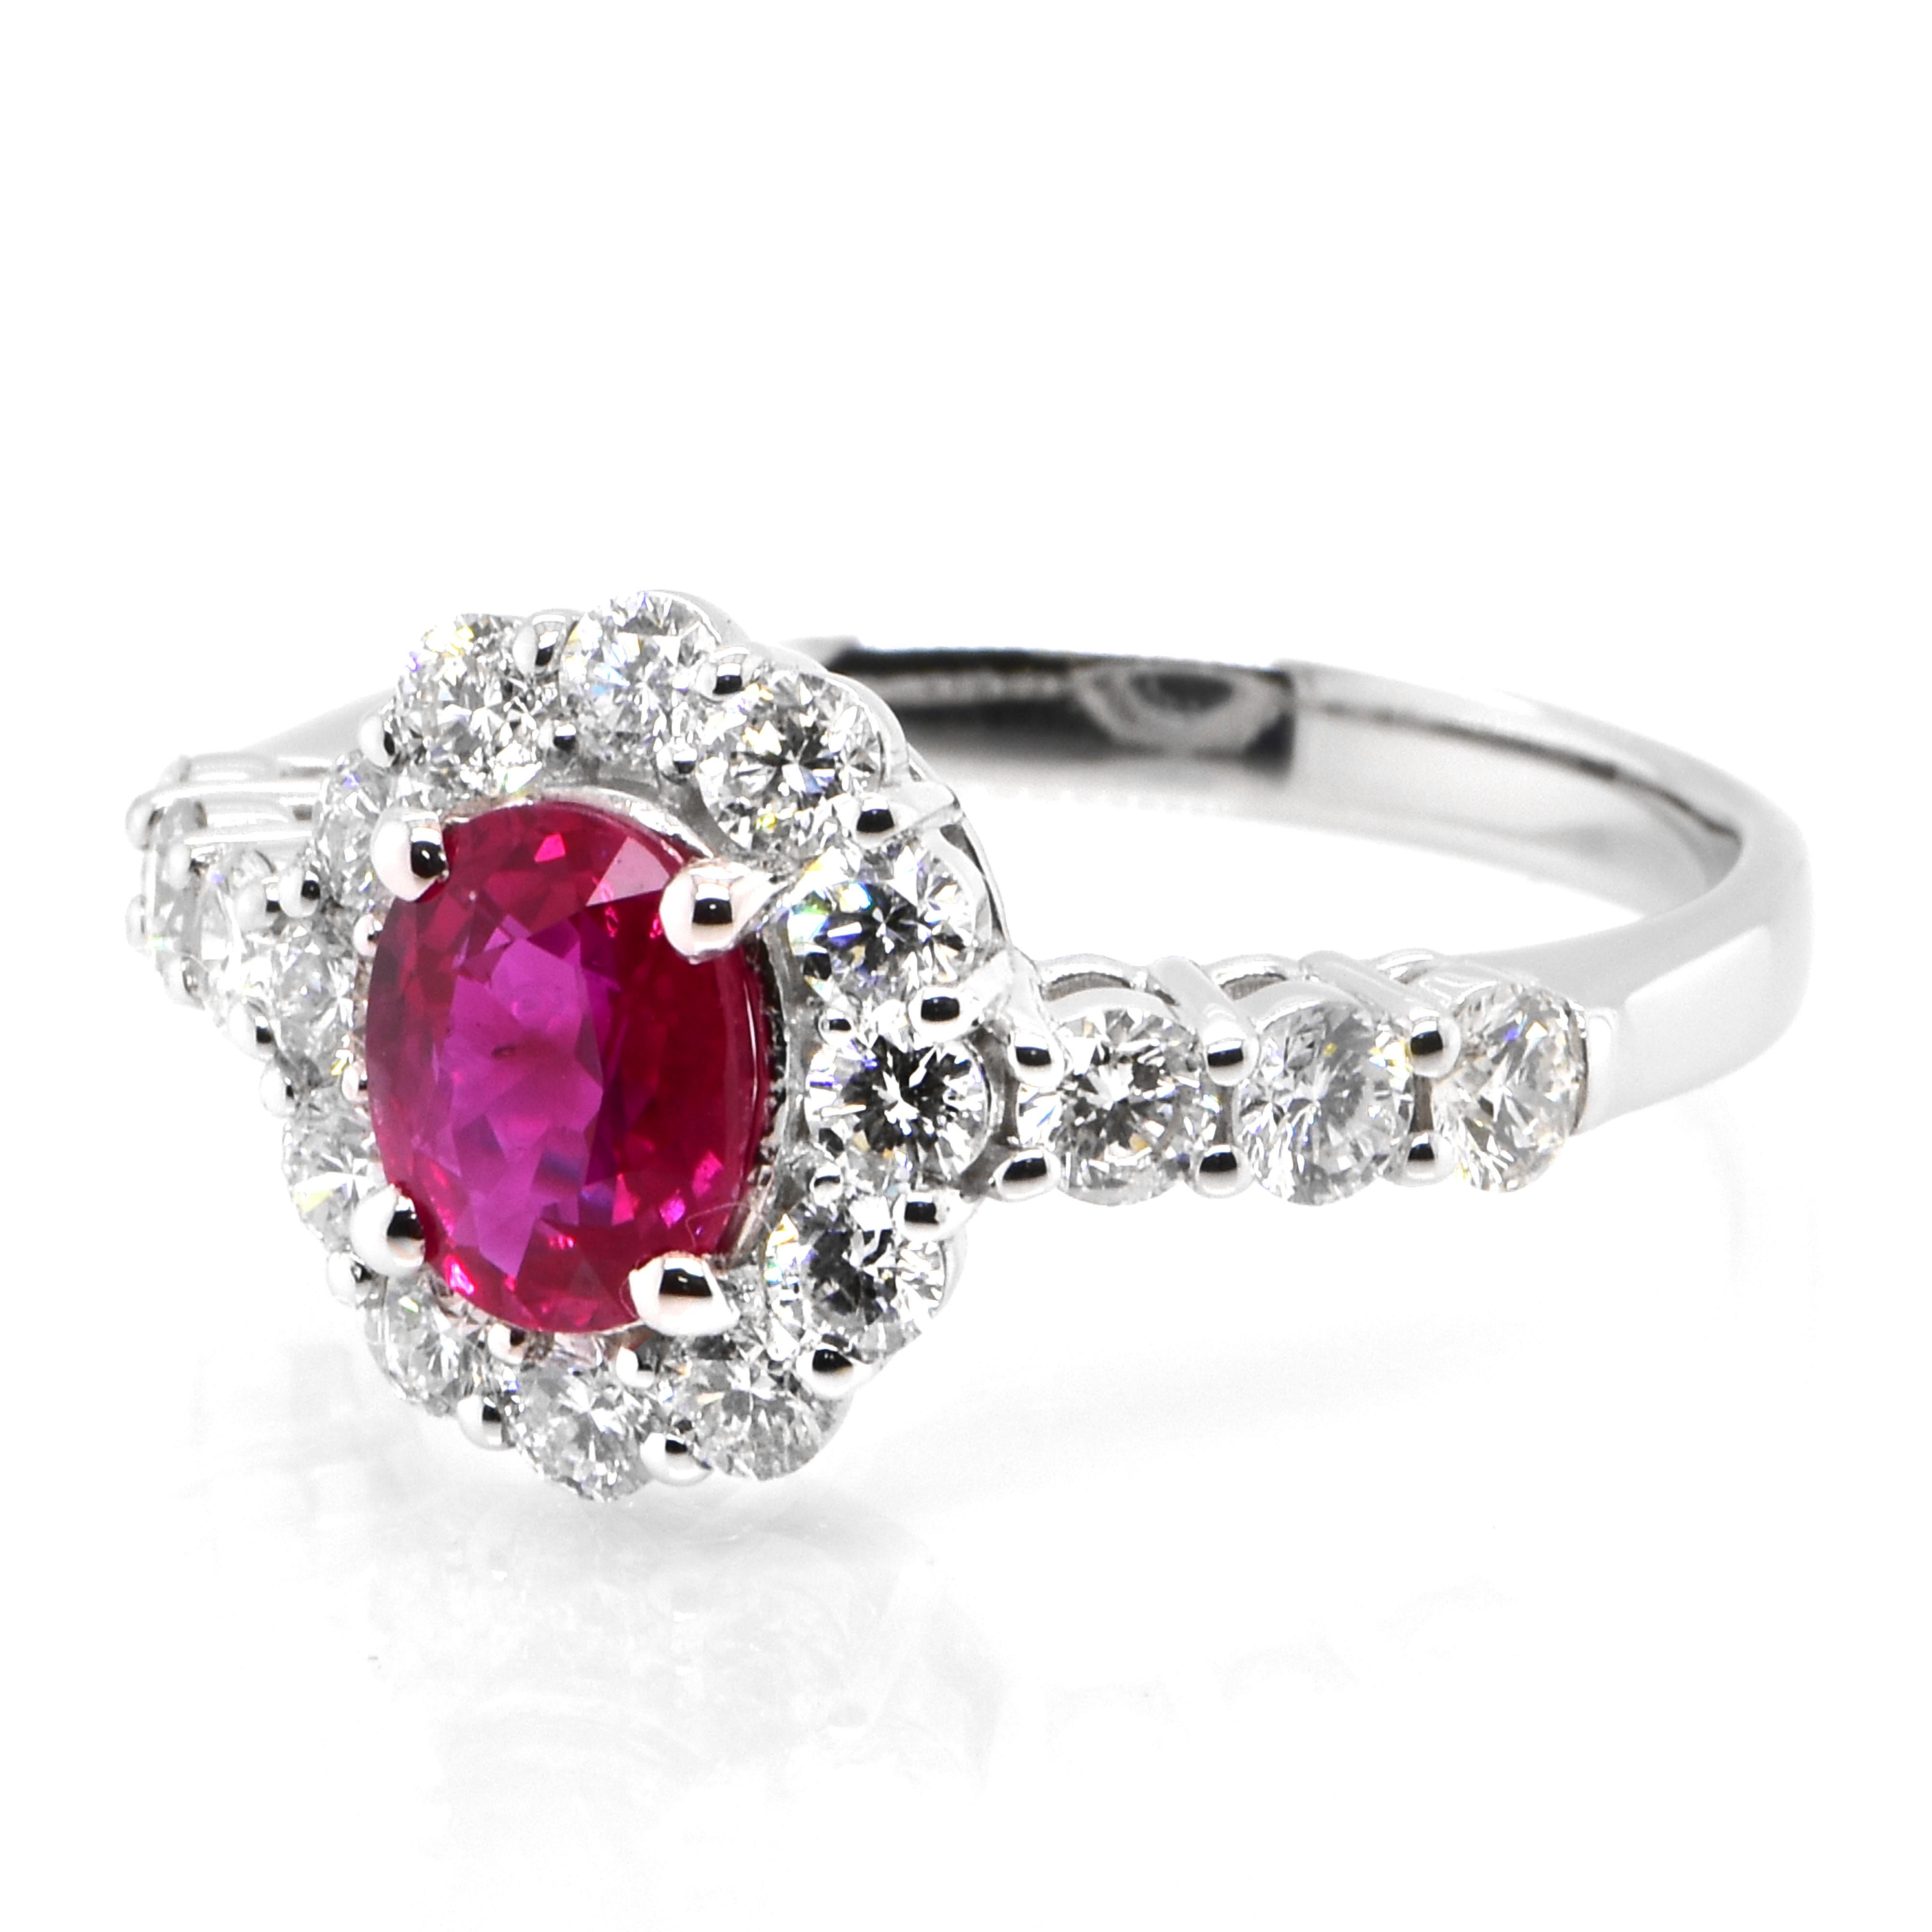 A beautiful Ring set in Platinum featuring a GIA Certified 1.02 Carat Natural Burmese Ruby and 0.89 Carat Diamonds. Rubies are referred to as 